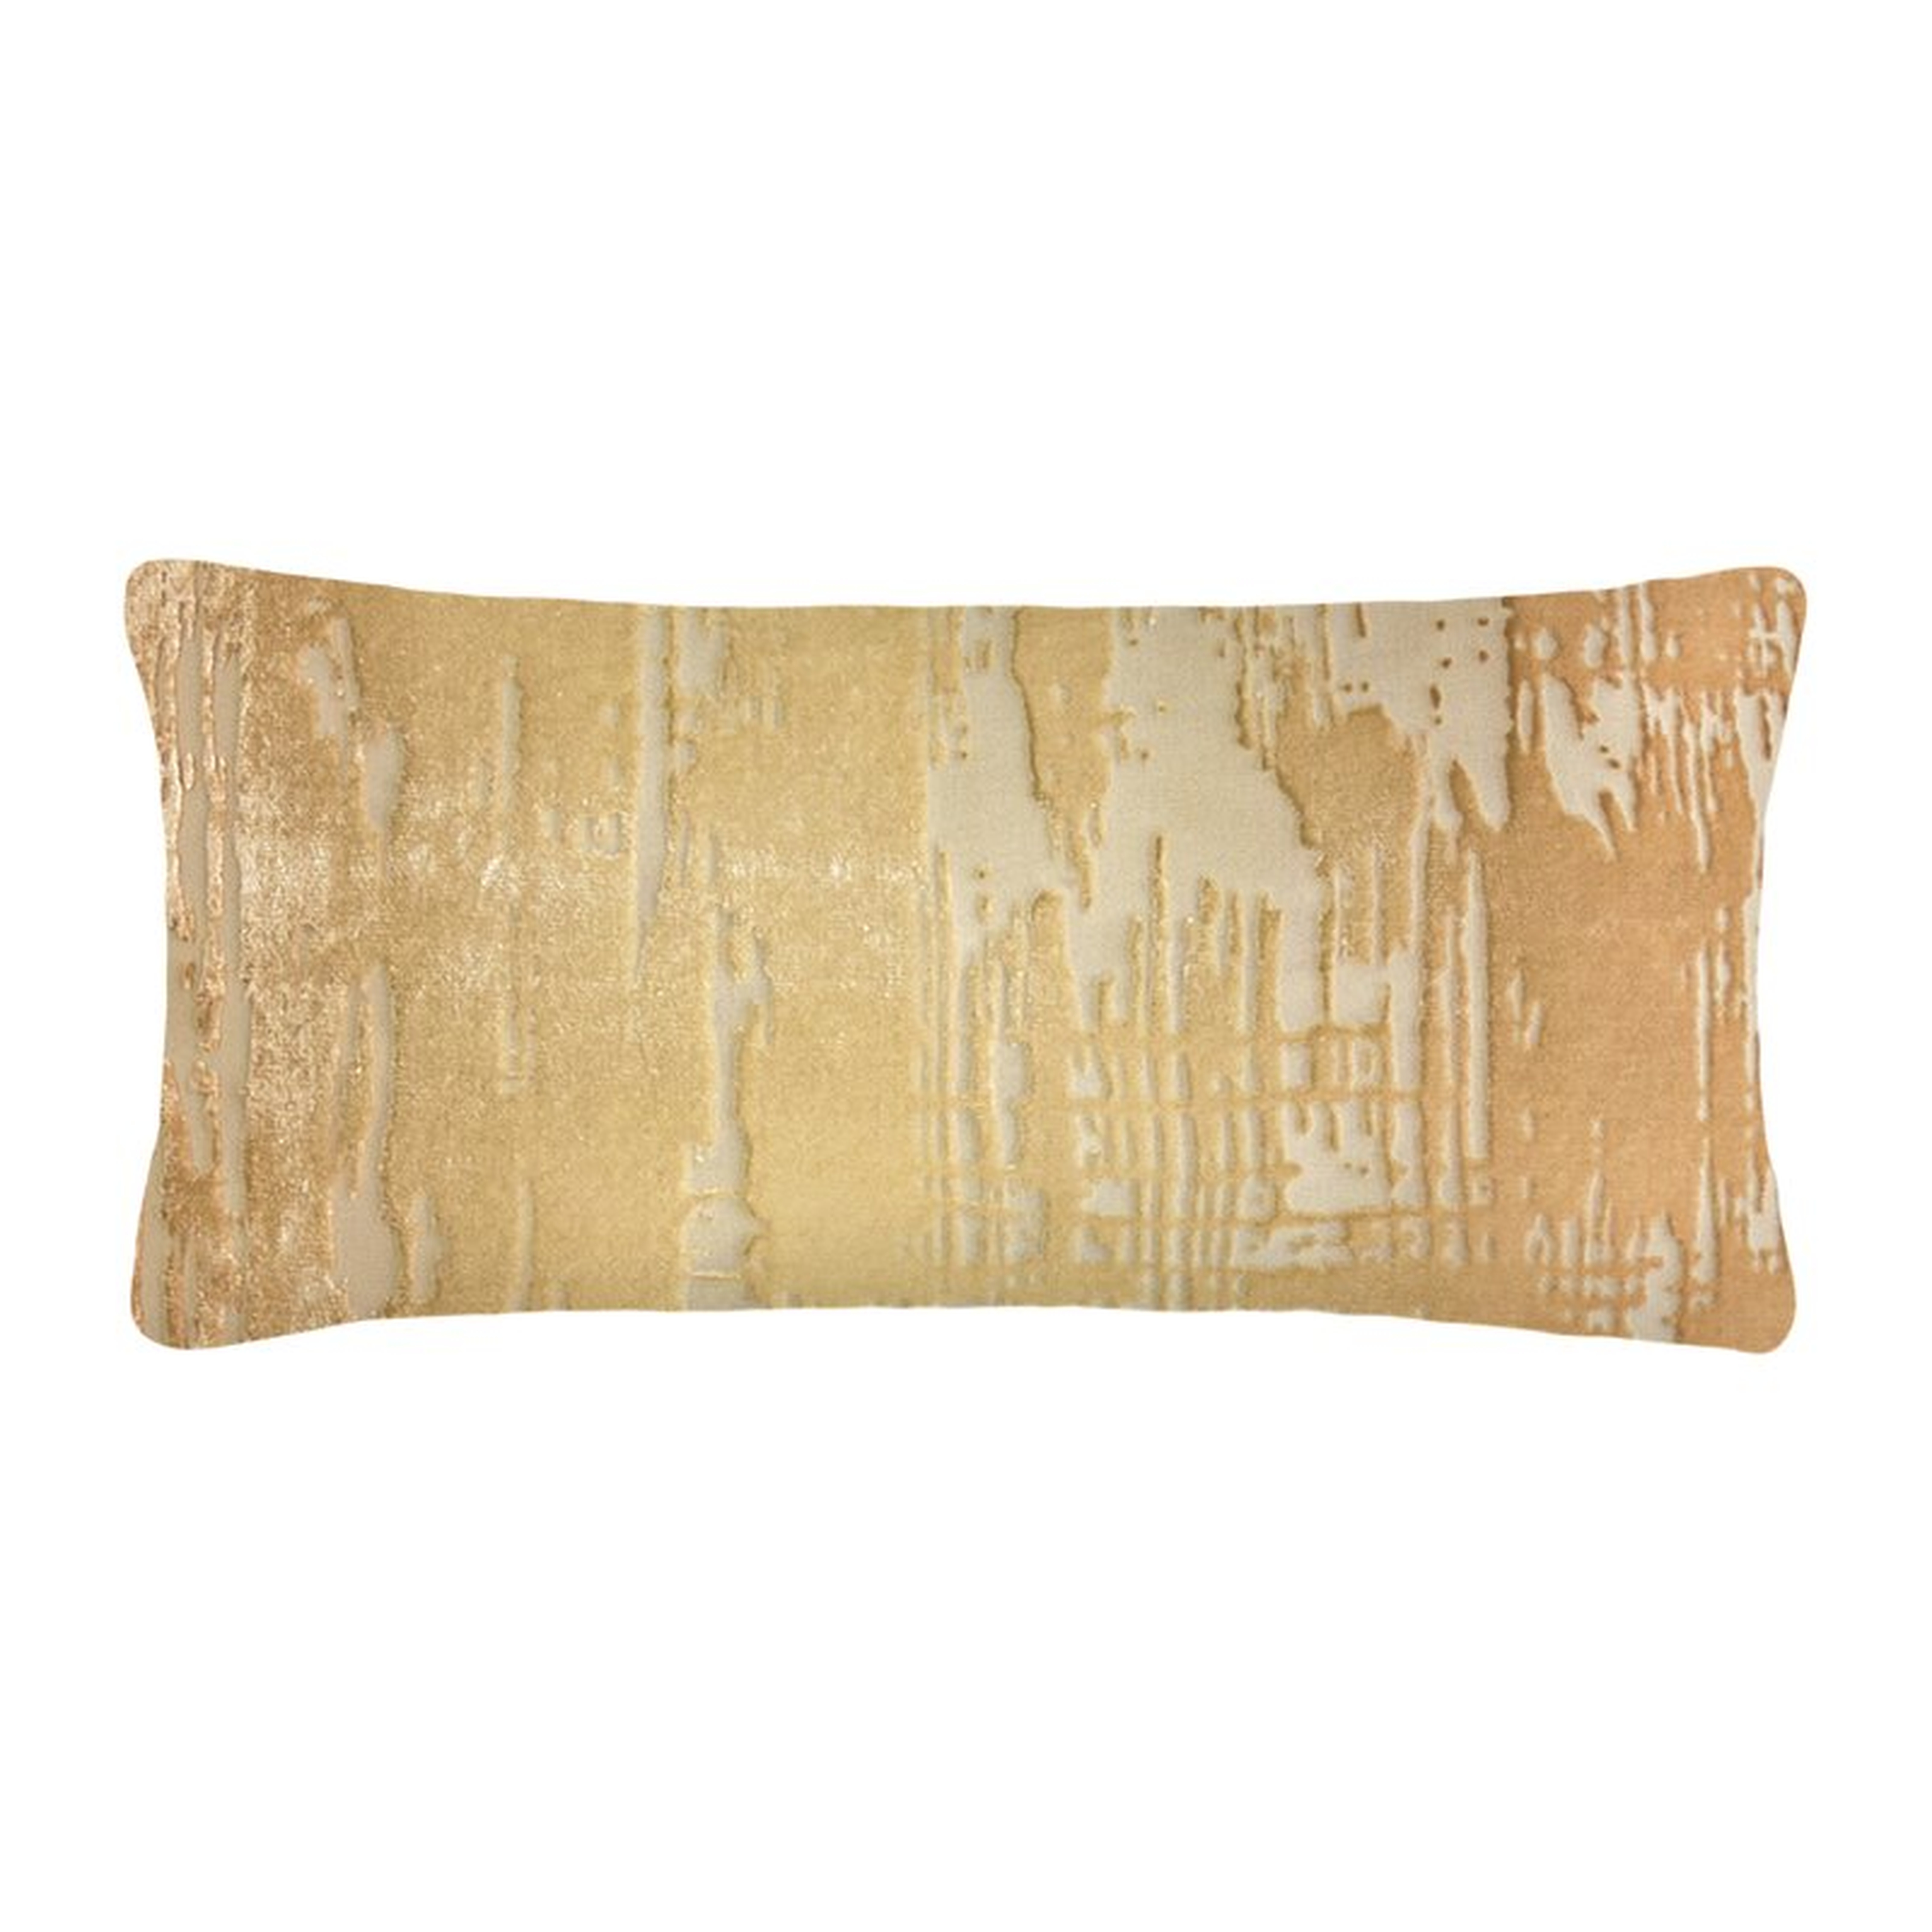 Kevin O'Brien Studio Brushstroke Down Abstract Lumbar Pillow Color: Gold Beige, Size: 8" x 16" - Perigold